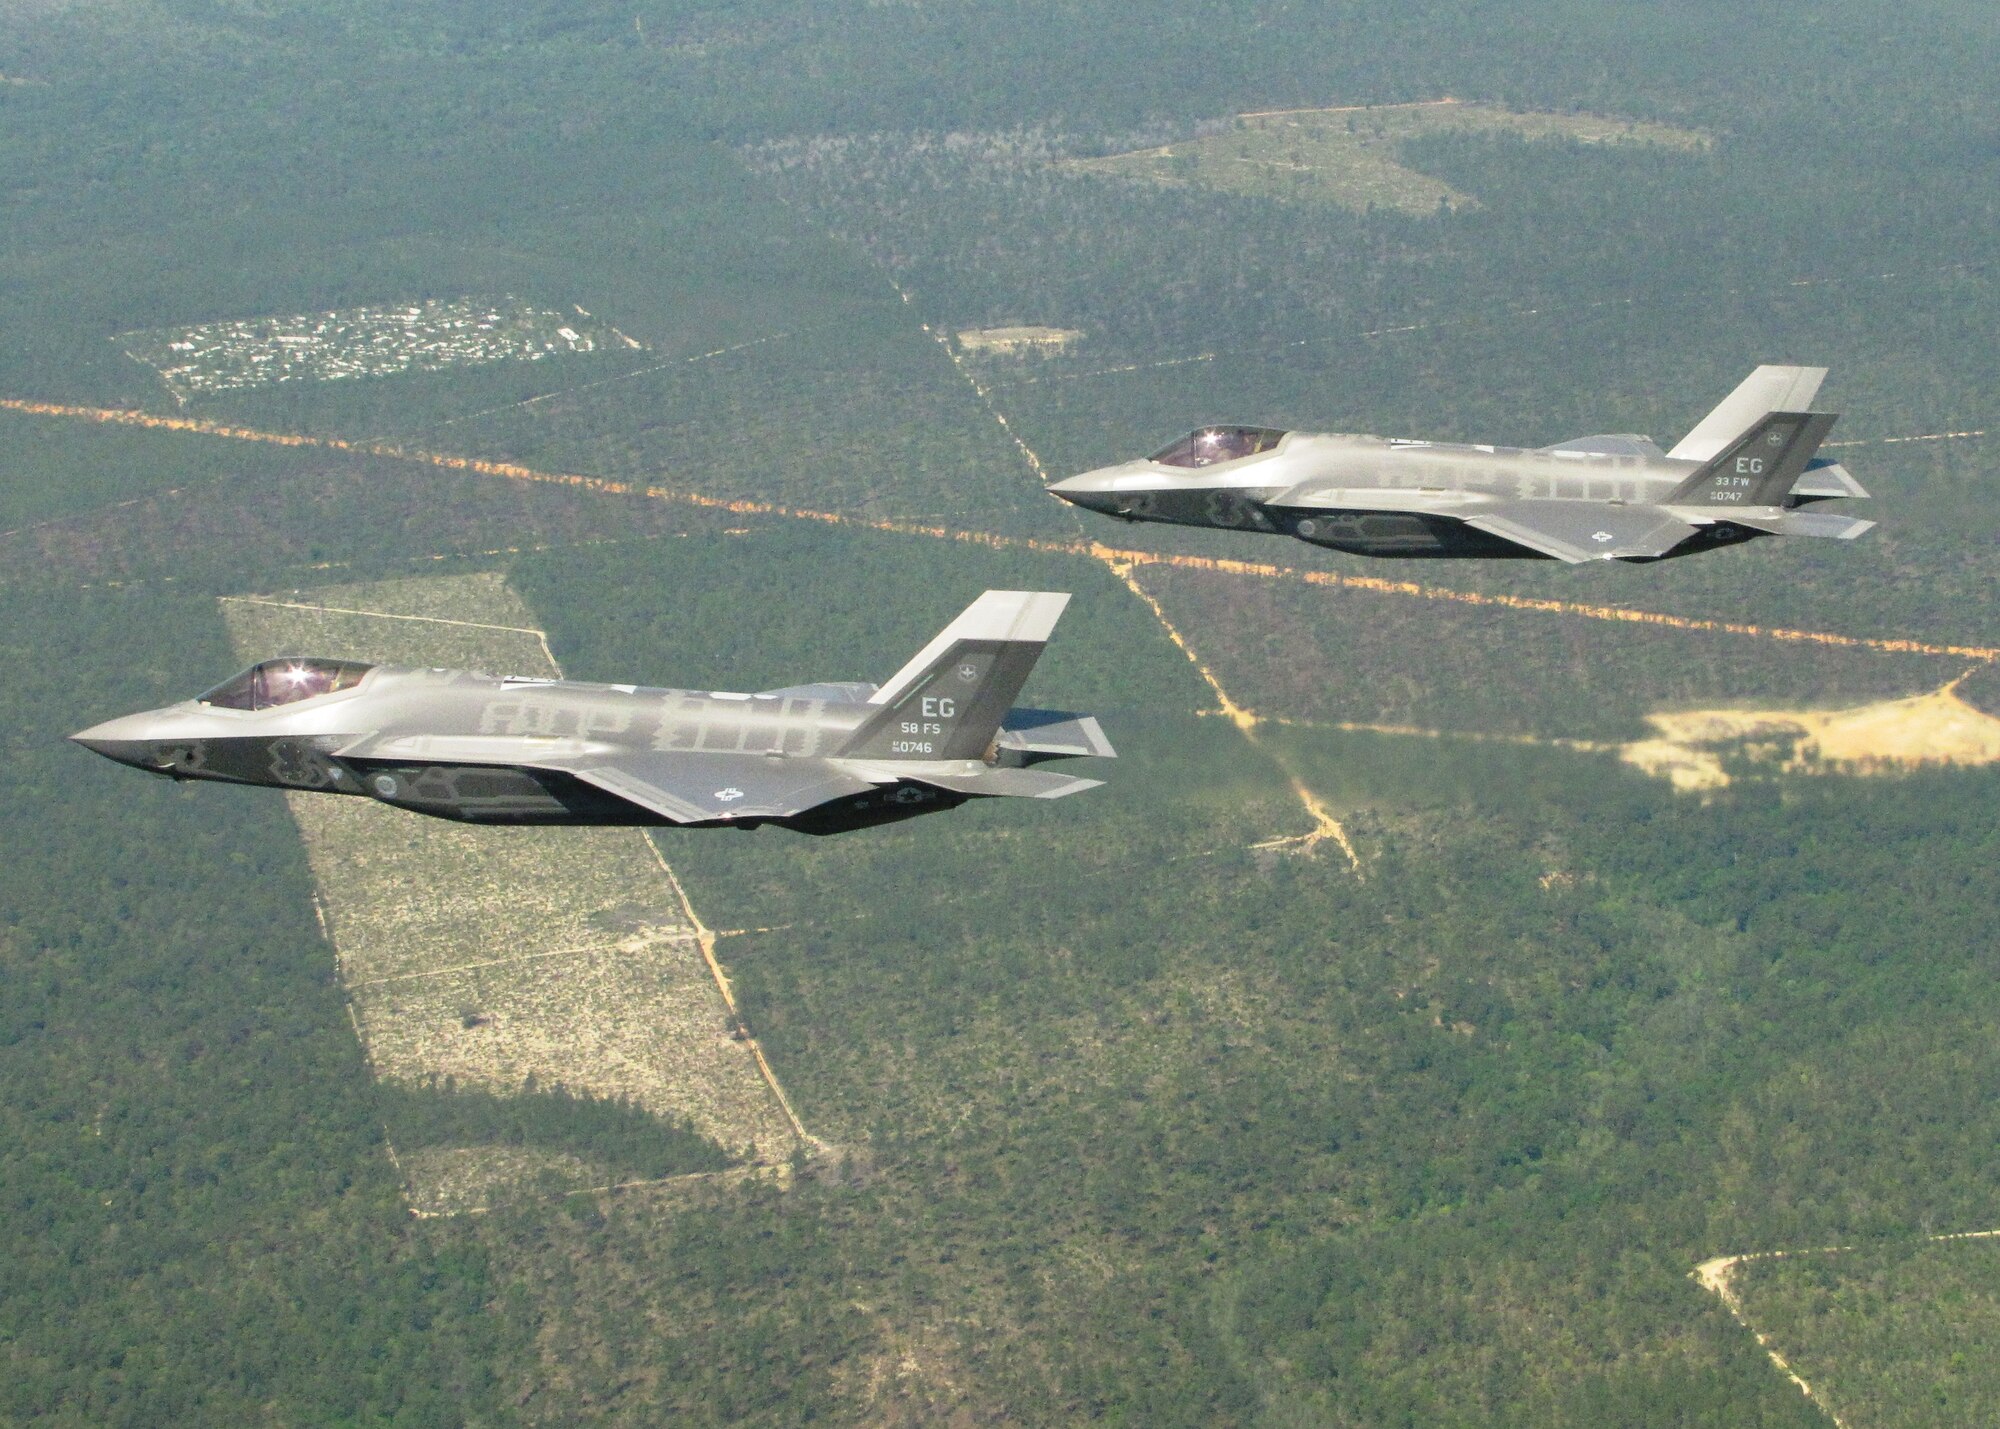 Two F-35A Lightning IIs from the 33rd Fighter Wing soar over Eglin Air Force Base's range during the unit’s first joint strike fighter formation flight April 10. Lt. Col. Eric Smith, 58th Fighter Squadron director of operations, flew the lead aircraft while Marine Maj Joseph Bachmann, Fighter Attack Training Squadron 501 aircraft maintenance officer, flew wingman. The pilots, both first in their service qualified to fly the 5th generation aircraft, were validating pilot syllabus objectives in preparation for future training. The 33rd FW is responsible for F-35 A/B/C pilot and maintainer training for the Marine Corps, Navy, Air Force, and in the future, at least eight coalition partners. (U.S. Air Force photo/Capt. Ryan Seymour)